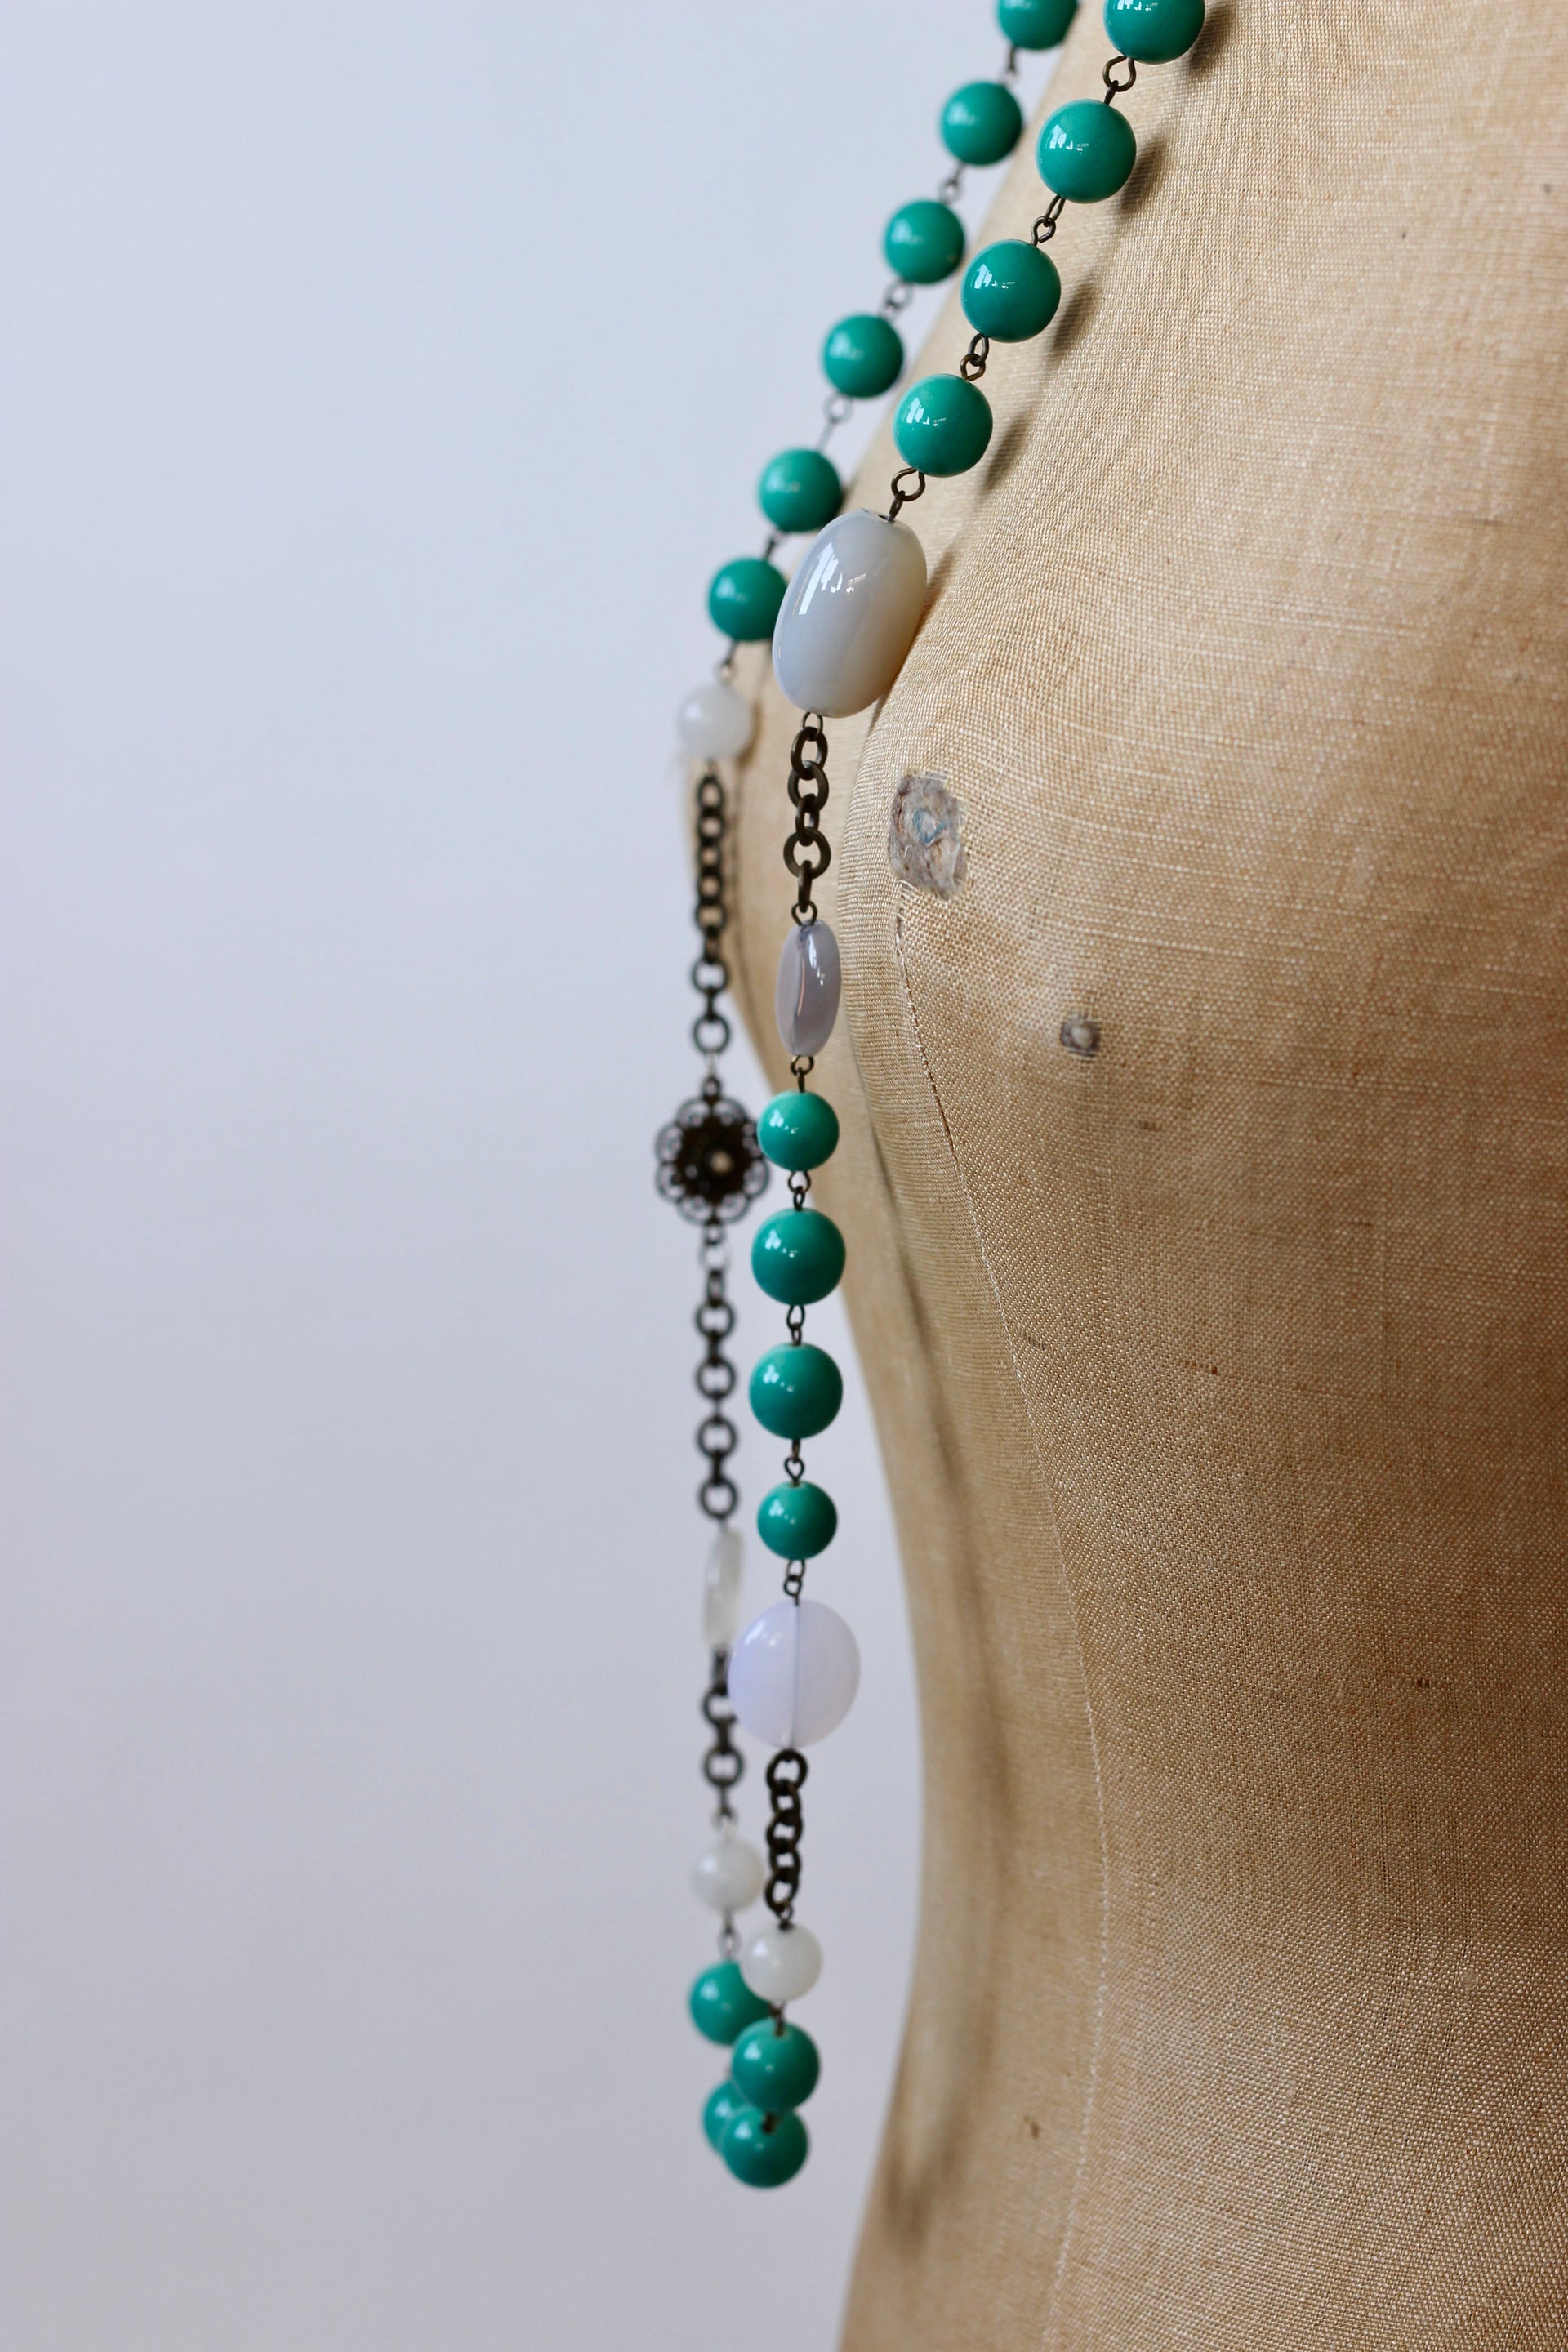 1970s Long Beaded Metal Chain with Glass Beads